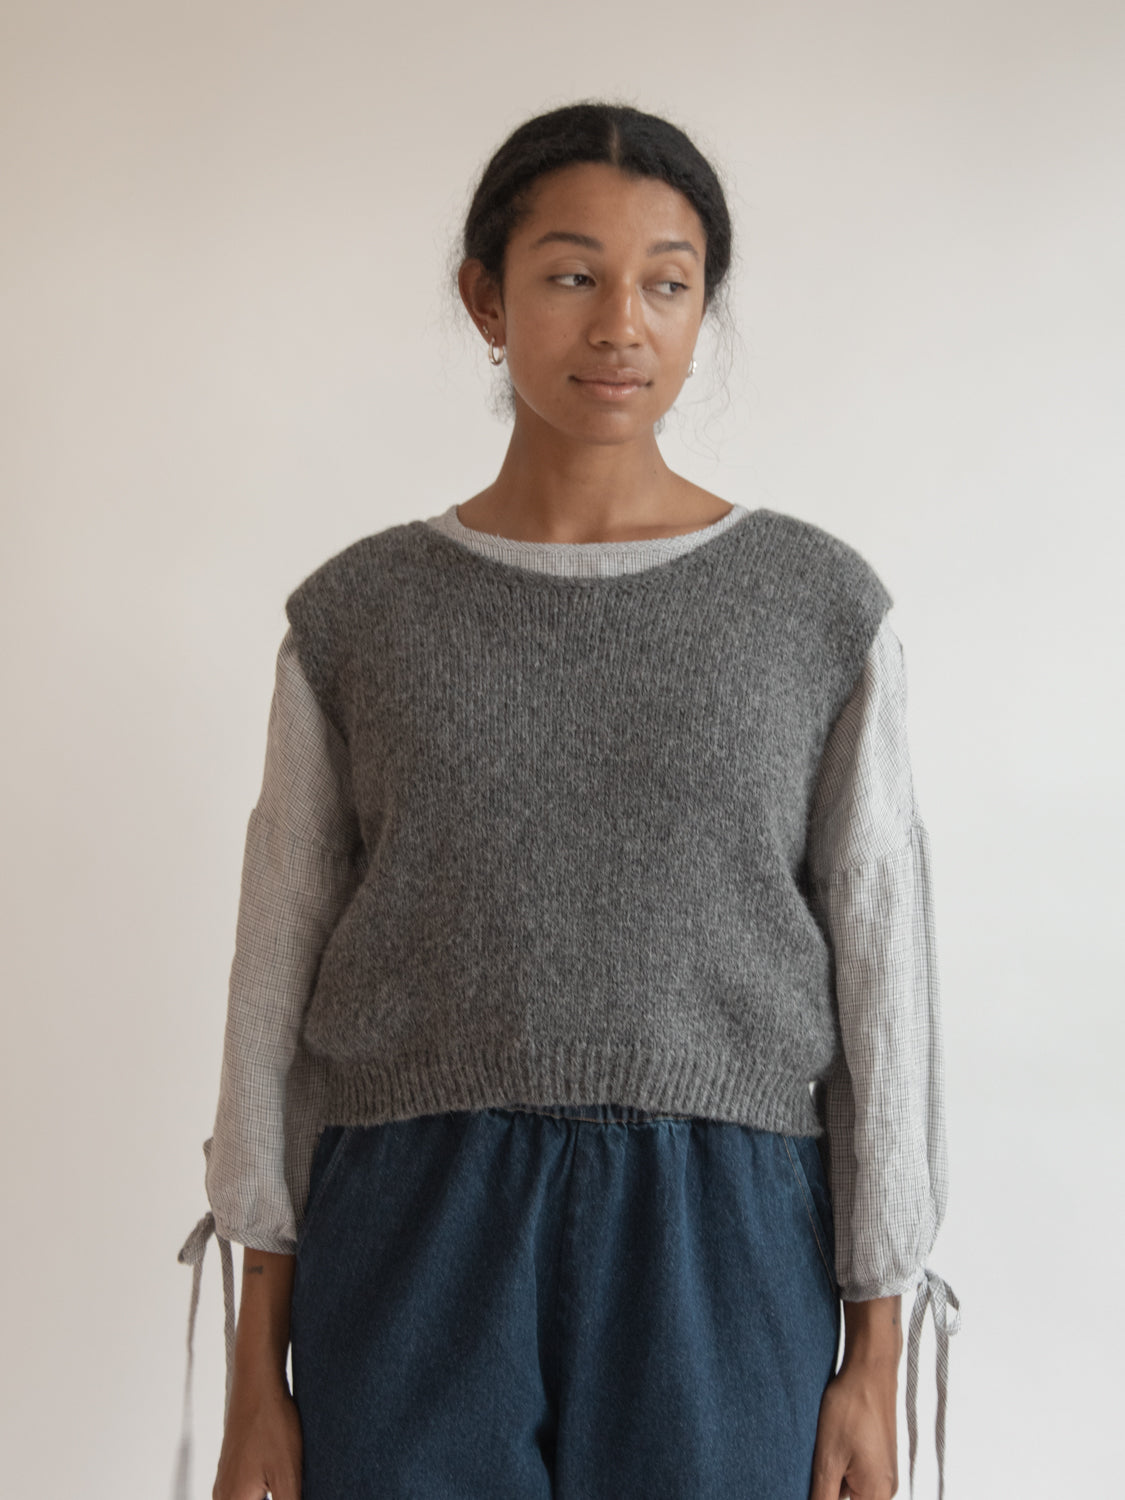 Briar Knit Vest in Charcoal